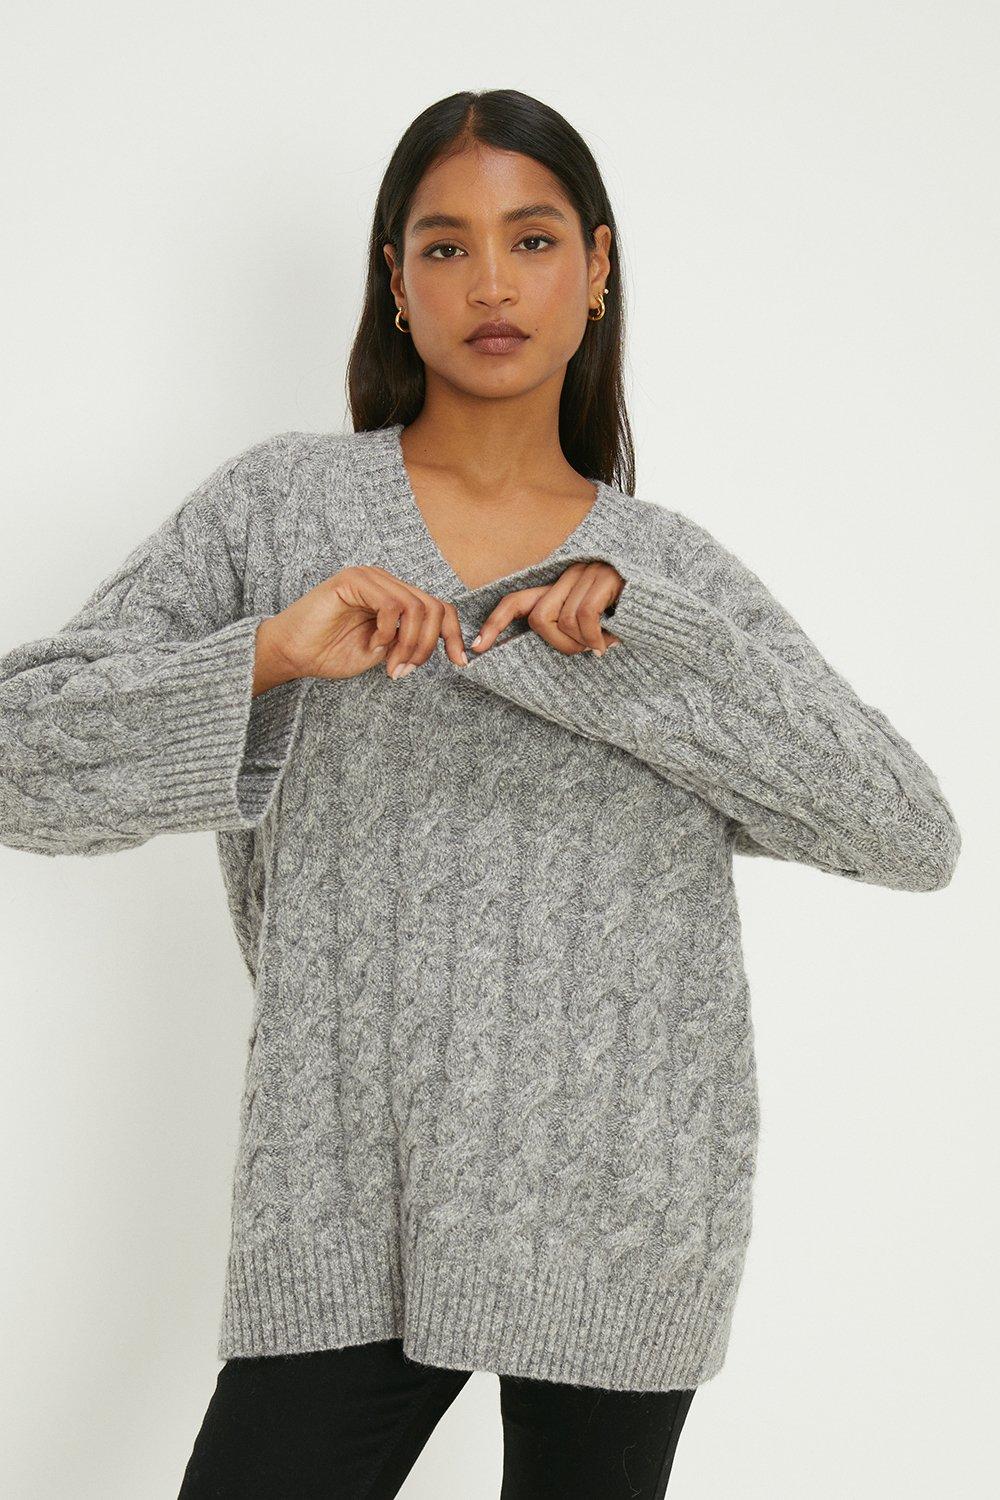 Women’s V-Neck Chunky Cable Tunic - grey - S